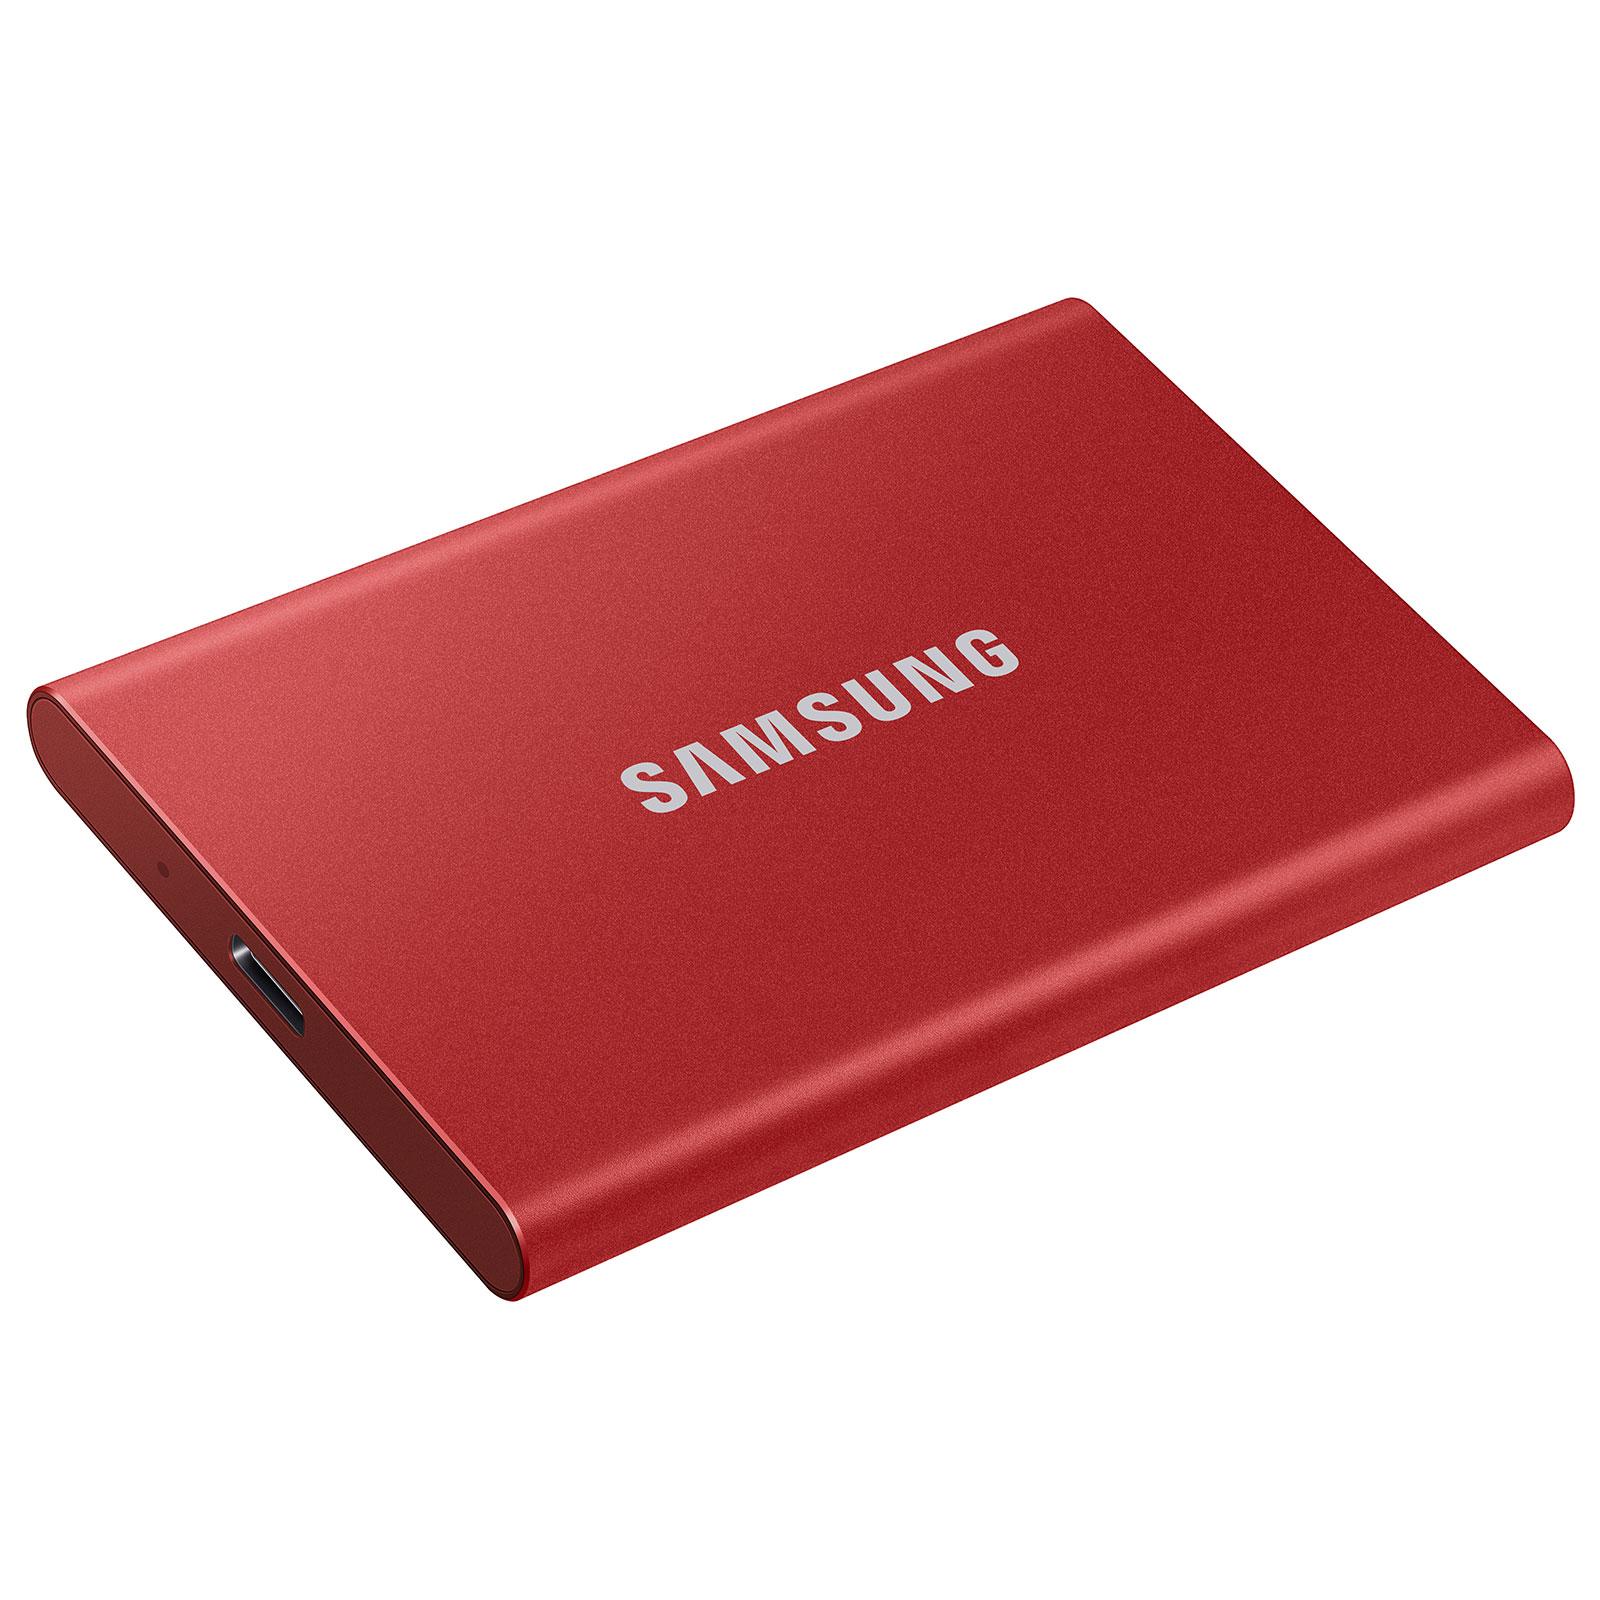 Samsung Portable SSD T7 1 To Rouge pas cher - HardWare.fr